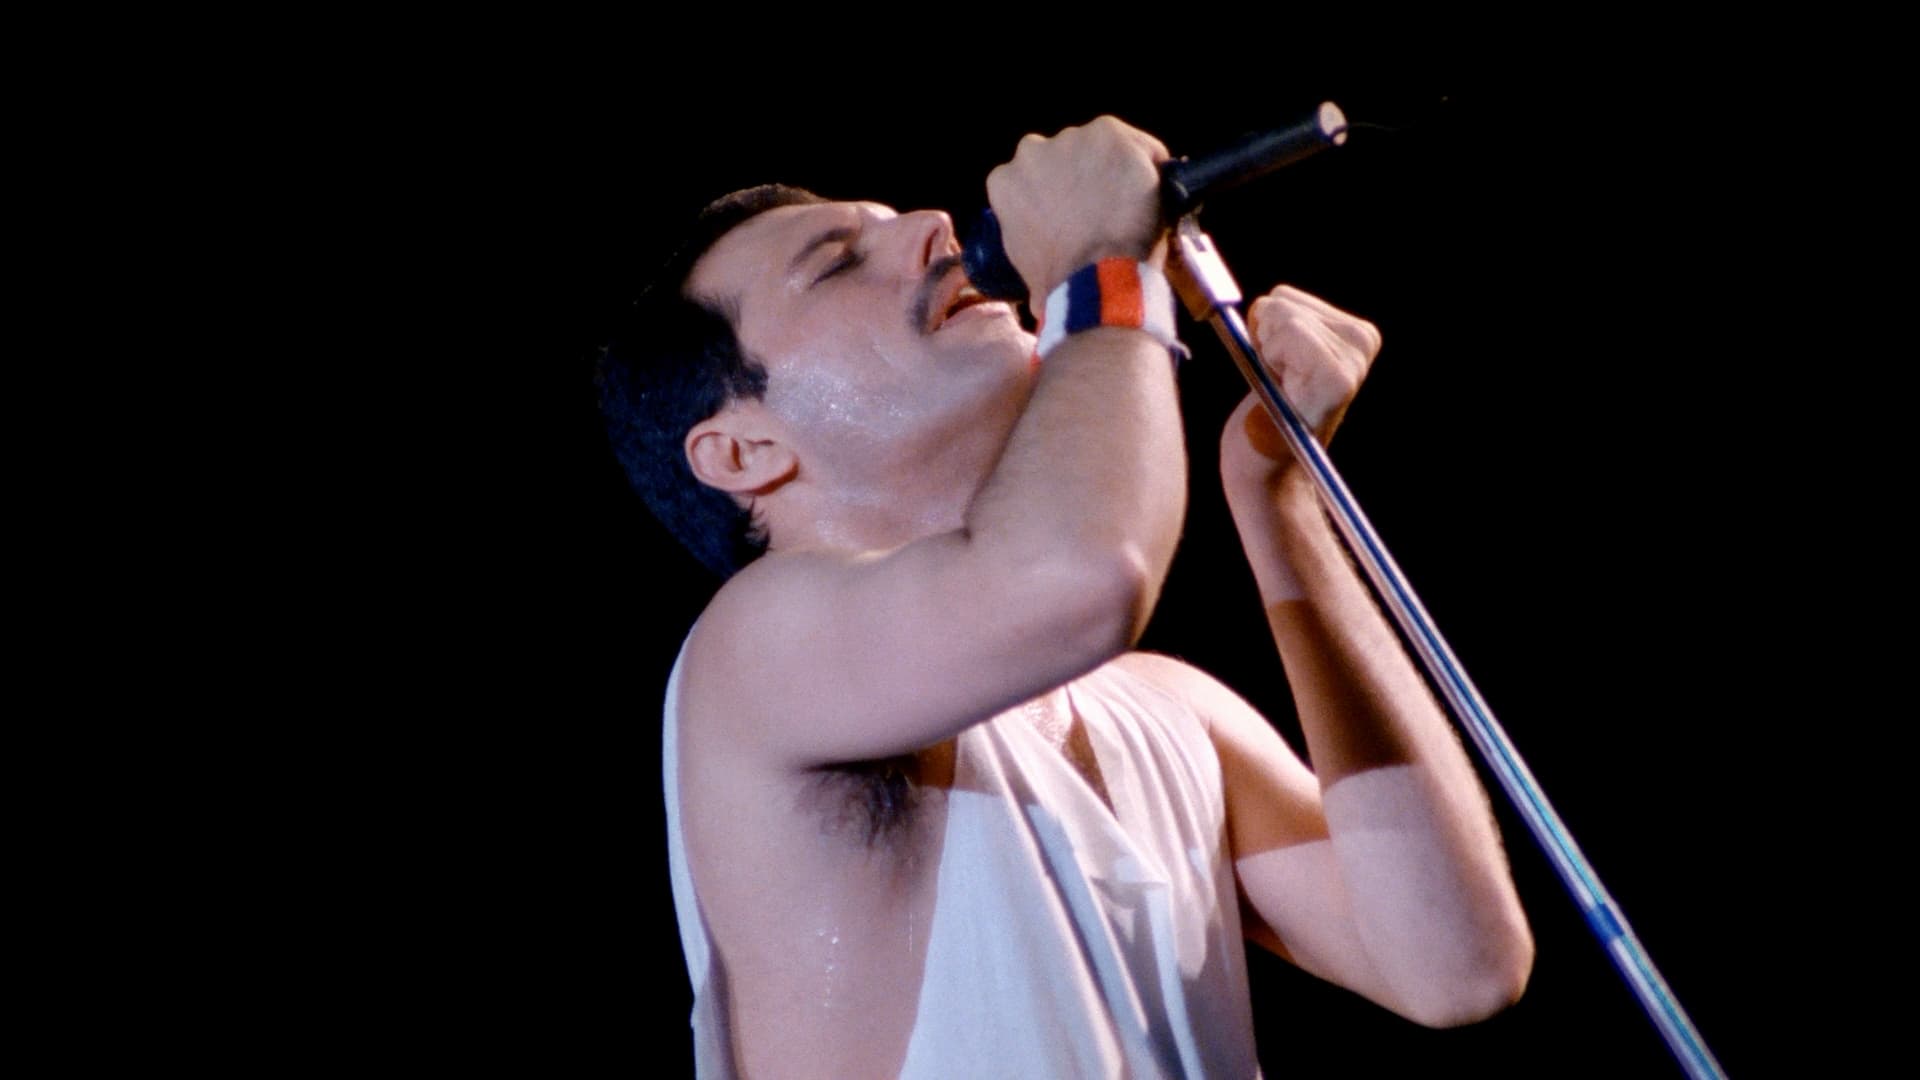 Queen: Hungarian Rhapsody – Live in Budapest 2012 123movies